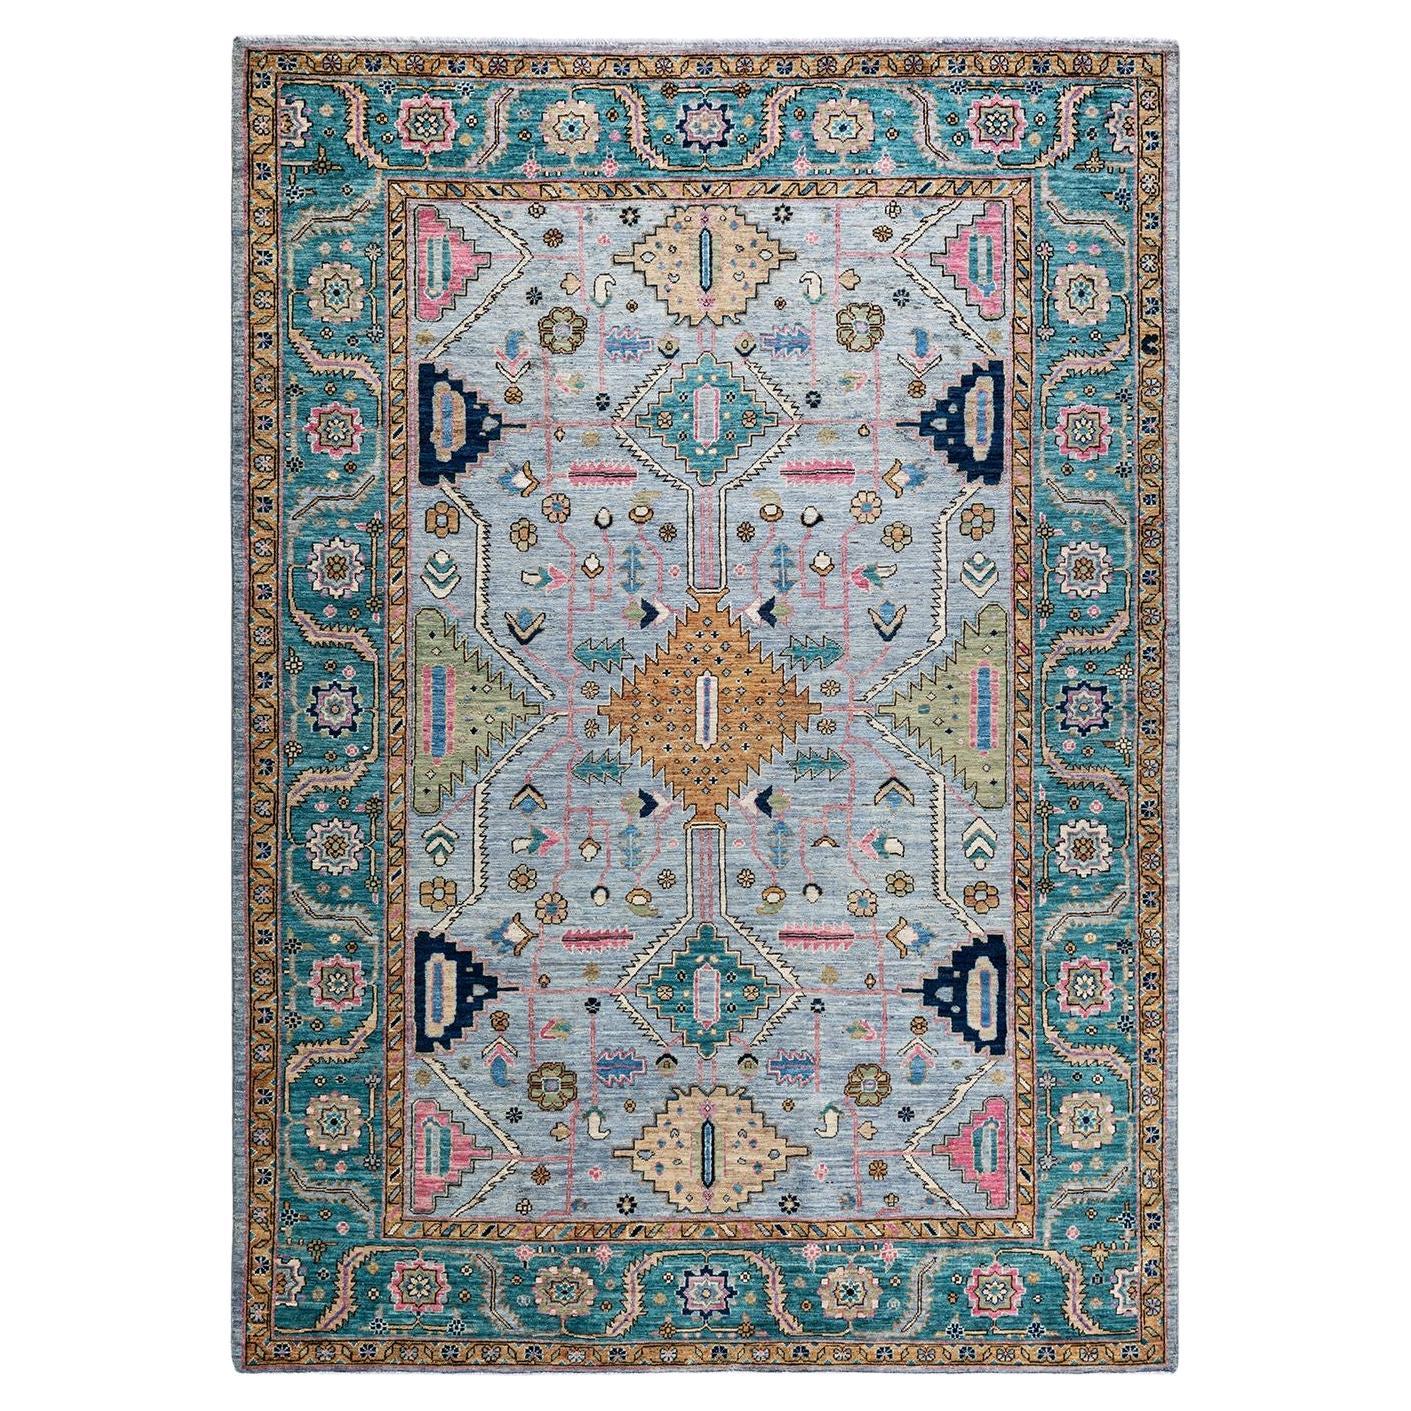 Serapi, One-of-a-Kind Hand-Knotted Runner Rug, Grey